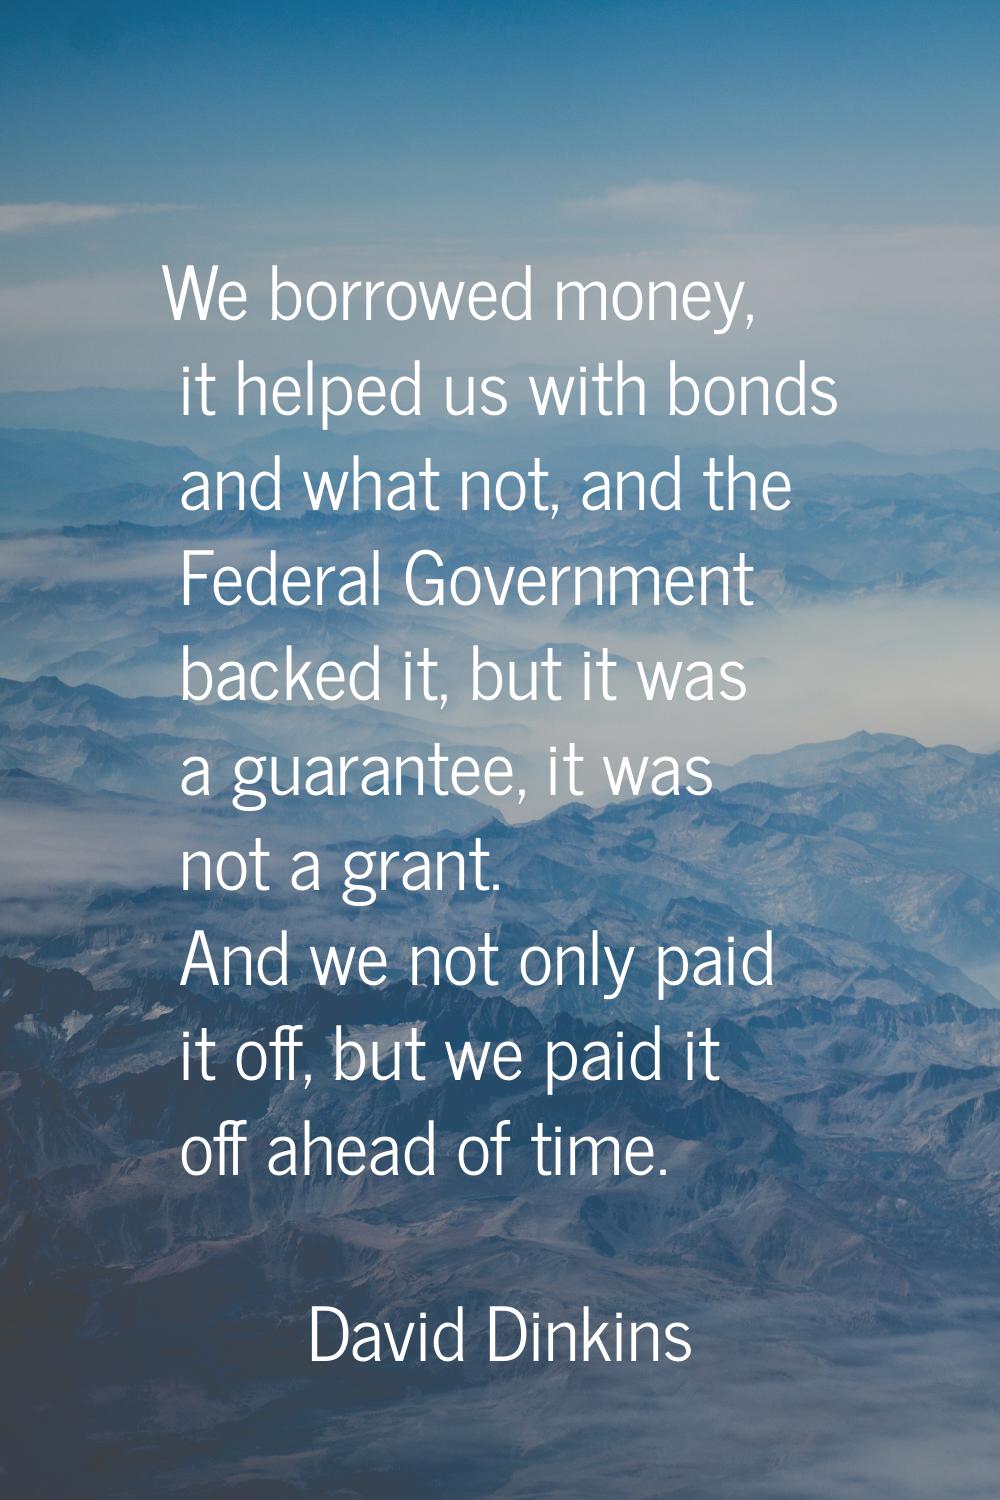 We borrowed money, it helped us with bonds and what not, and the Federal Government backed it, but 